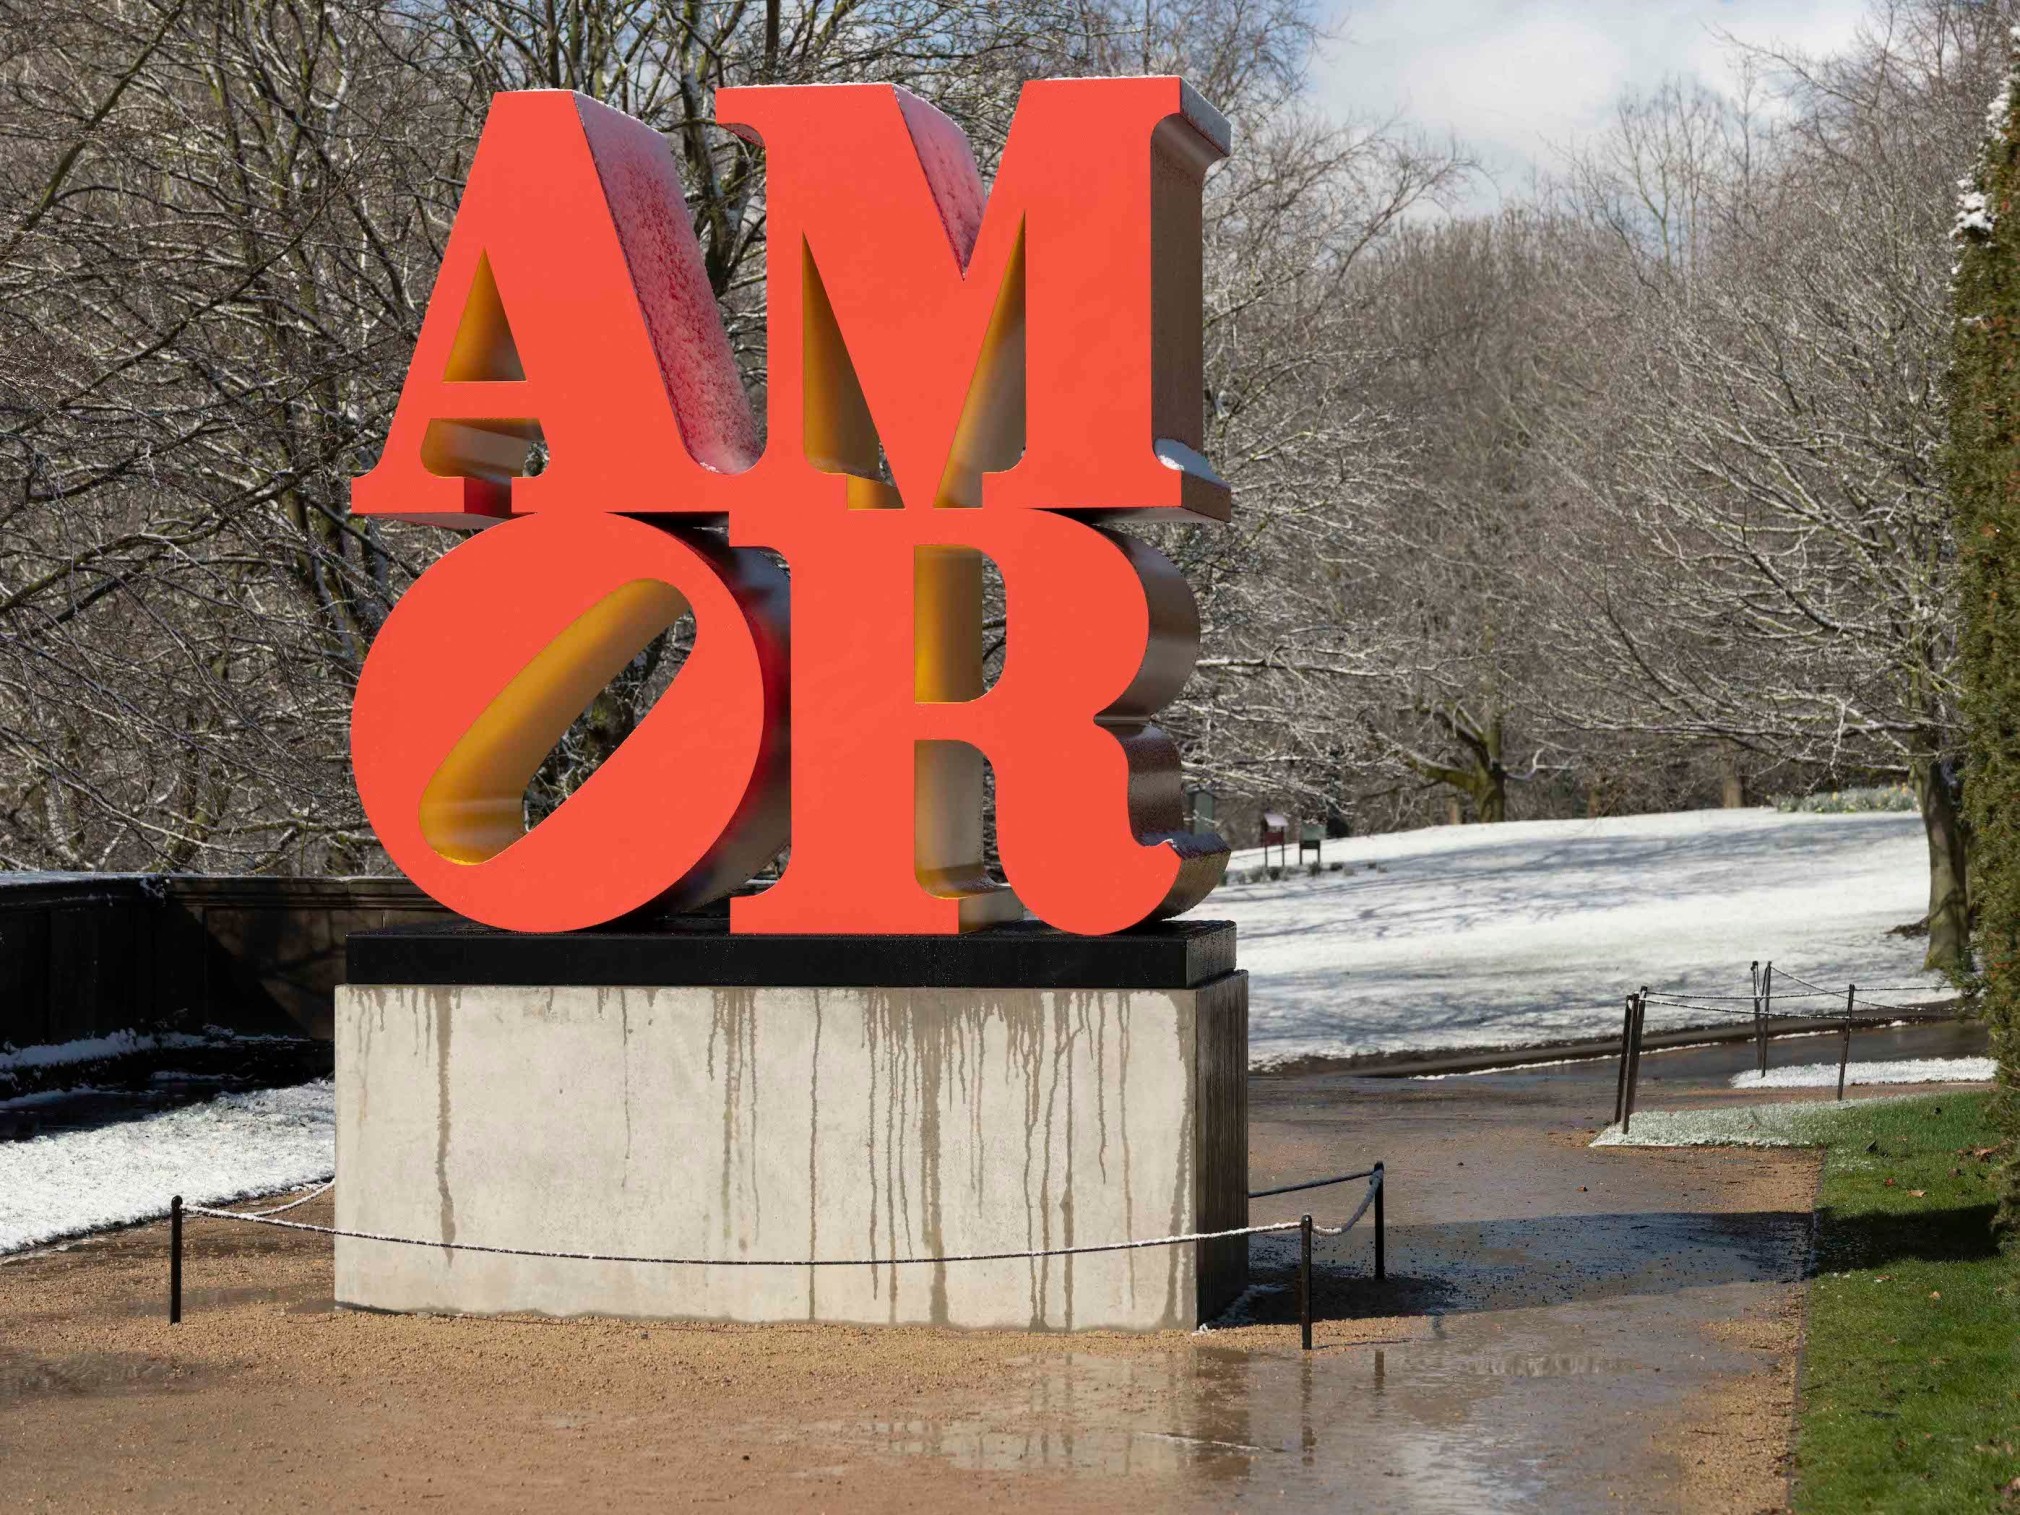 Robert Indiana, AMOR (Red Yellow), 1998&ndash;2006,&nbsp;96 x 96 x 48 in. (243.8 x 243.8 x 121.9 cm), installation view at Yorkshire Sculpture Park, 2022., &nbsp;